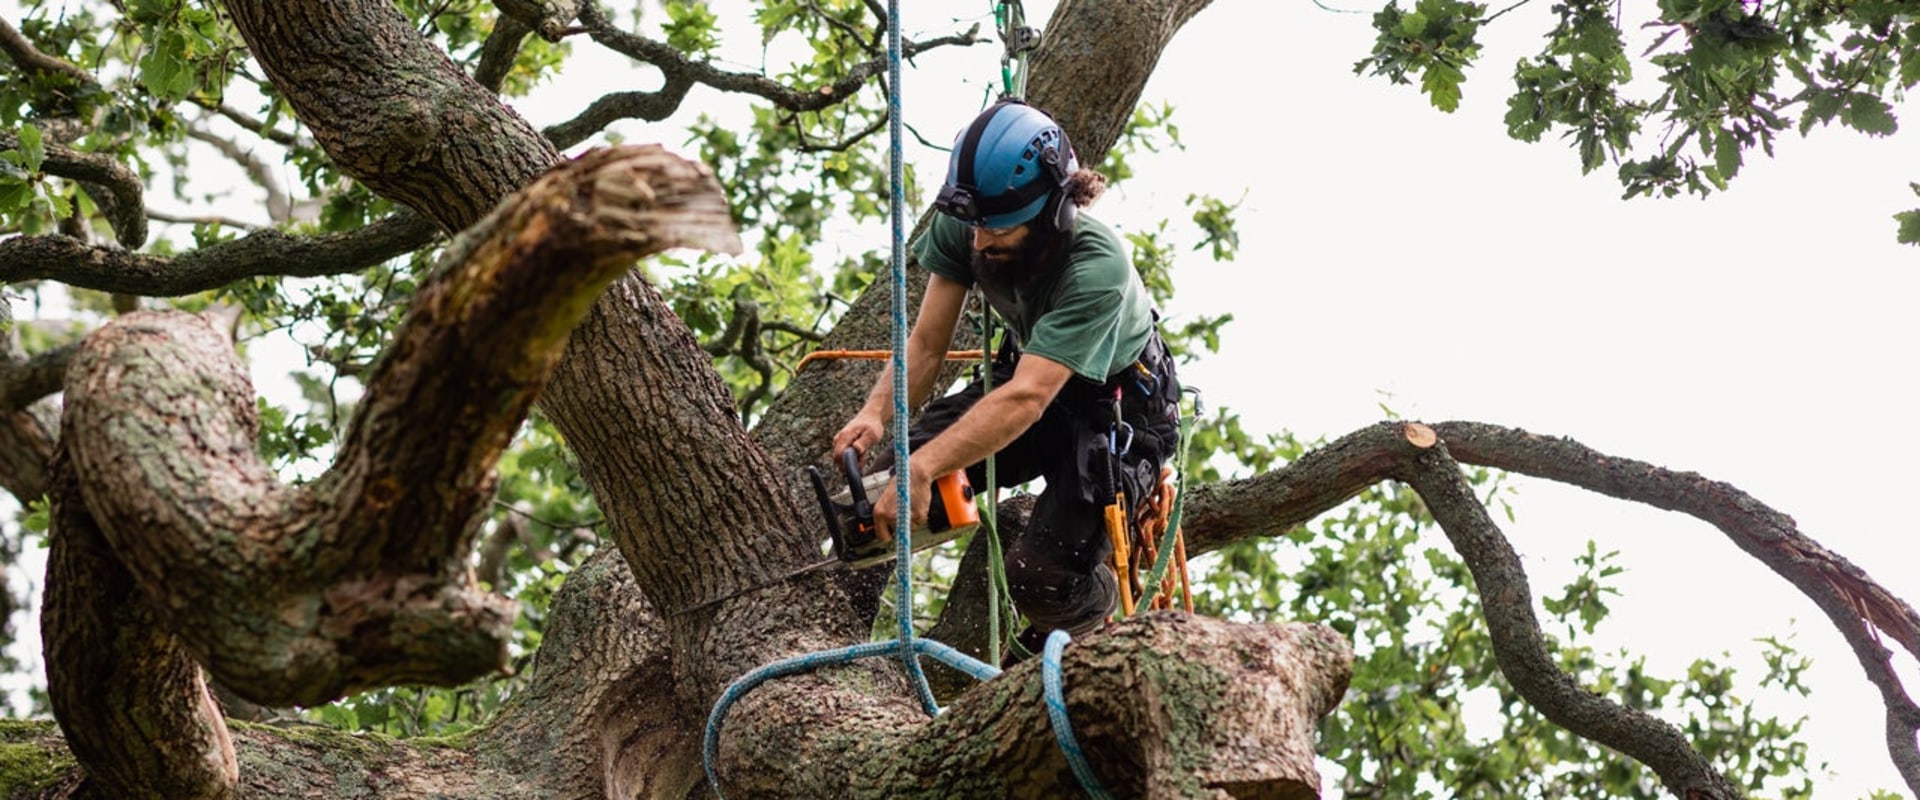 Will home insurance cover tree removal?